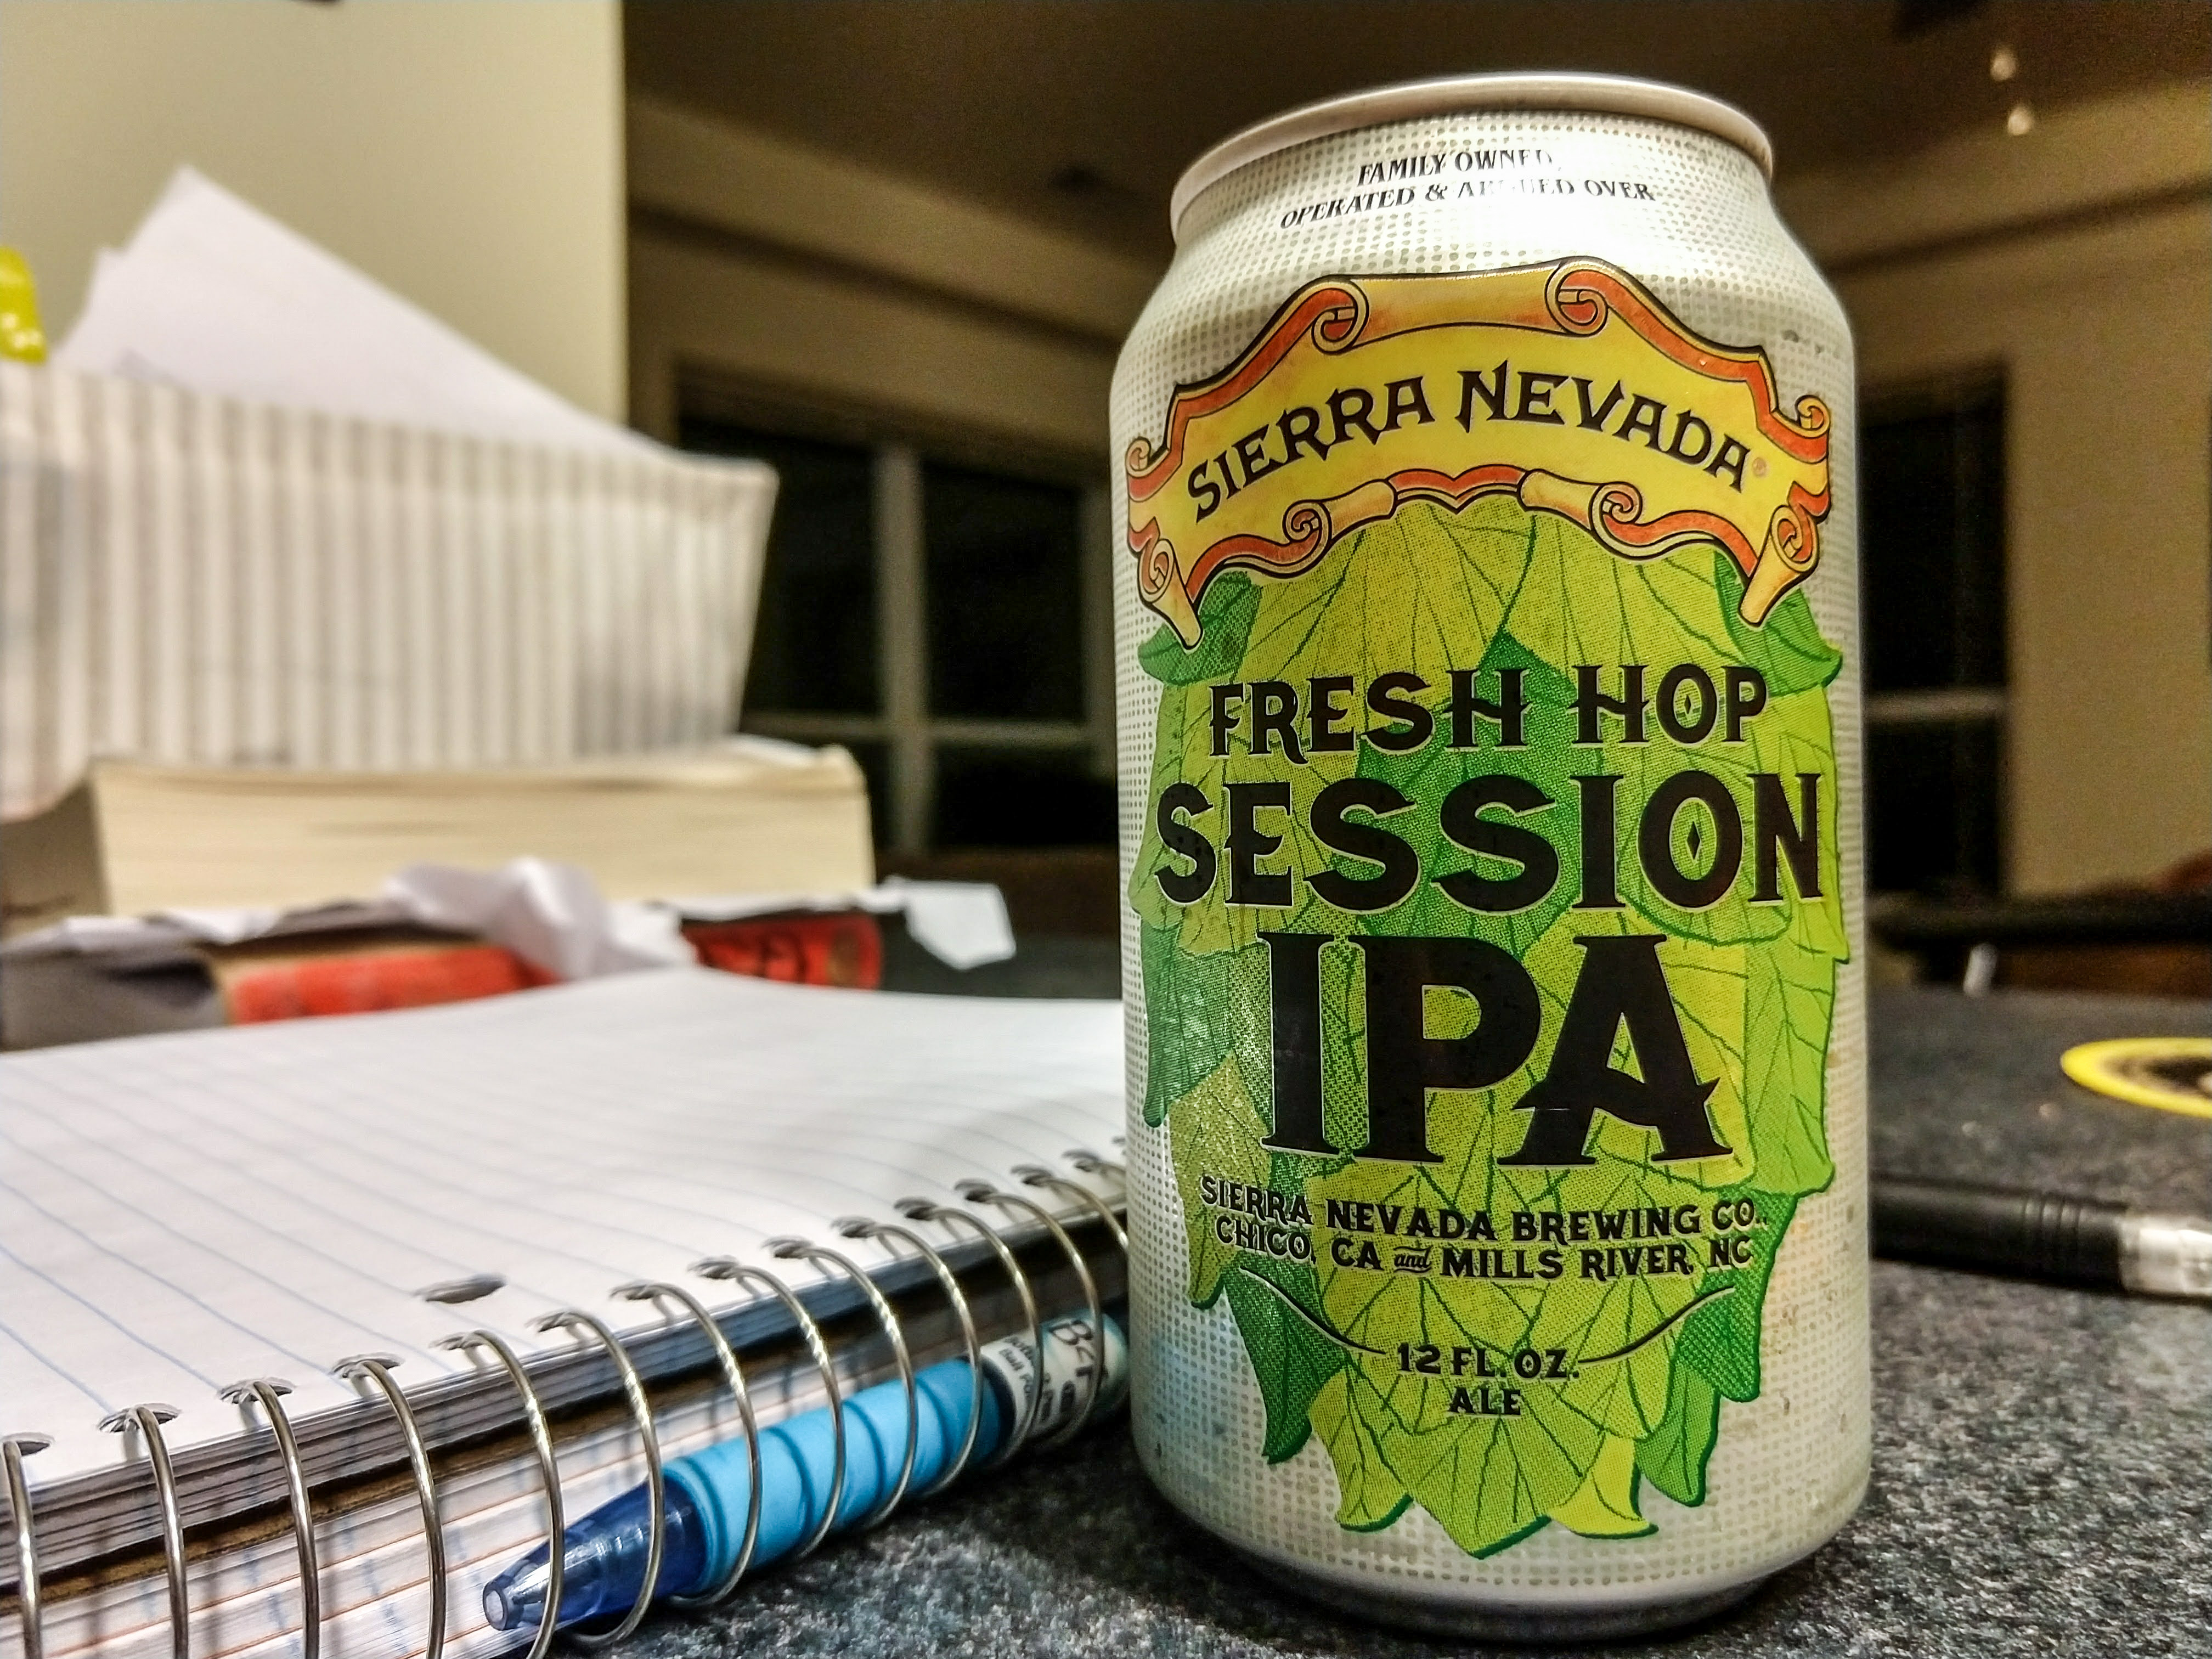 A can of Sierra Nevadas fresh hop session beer next to a notebook.